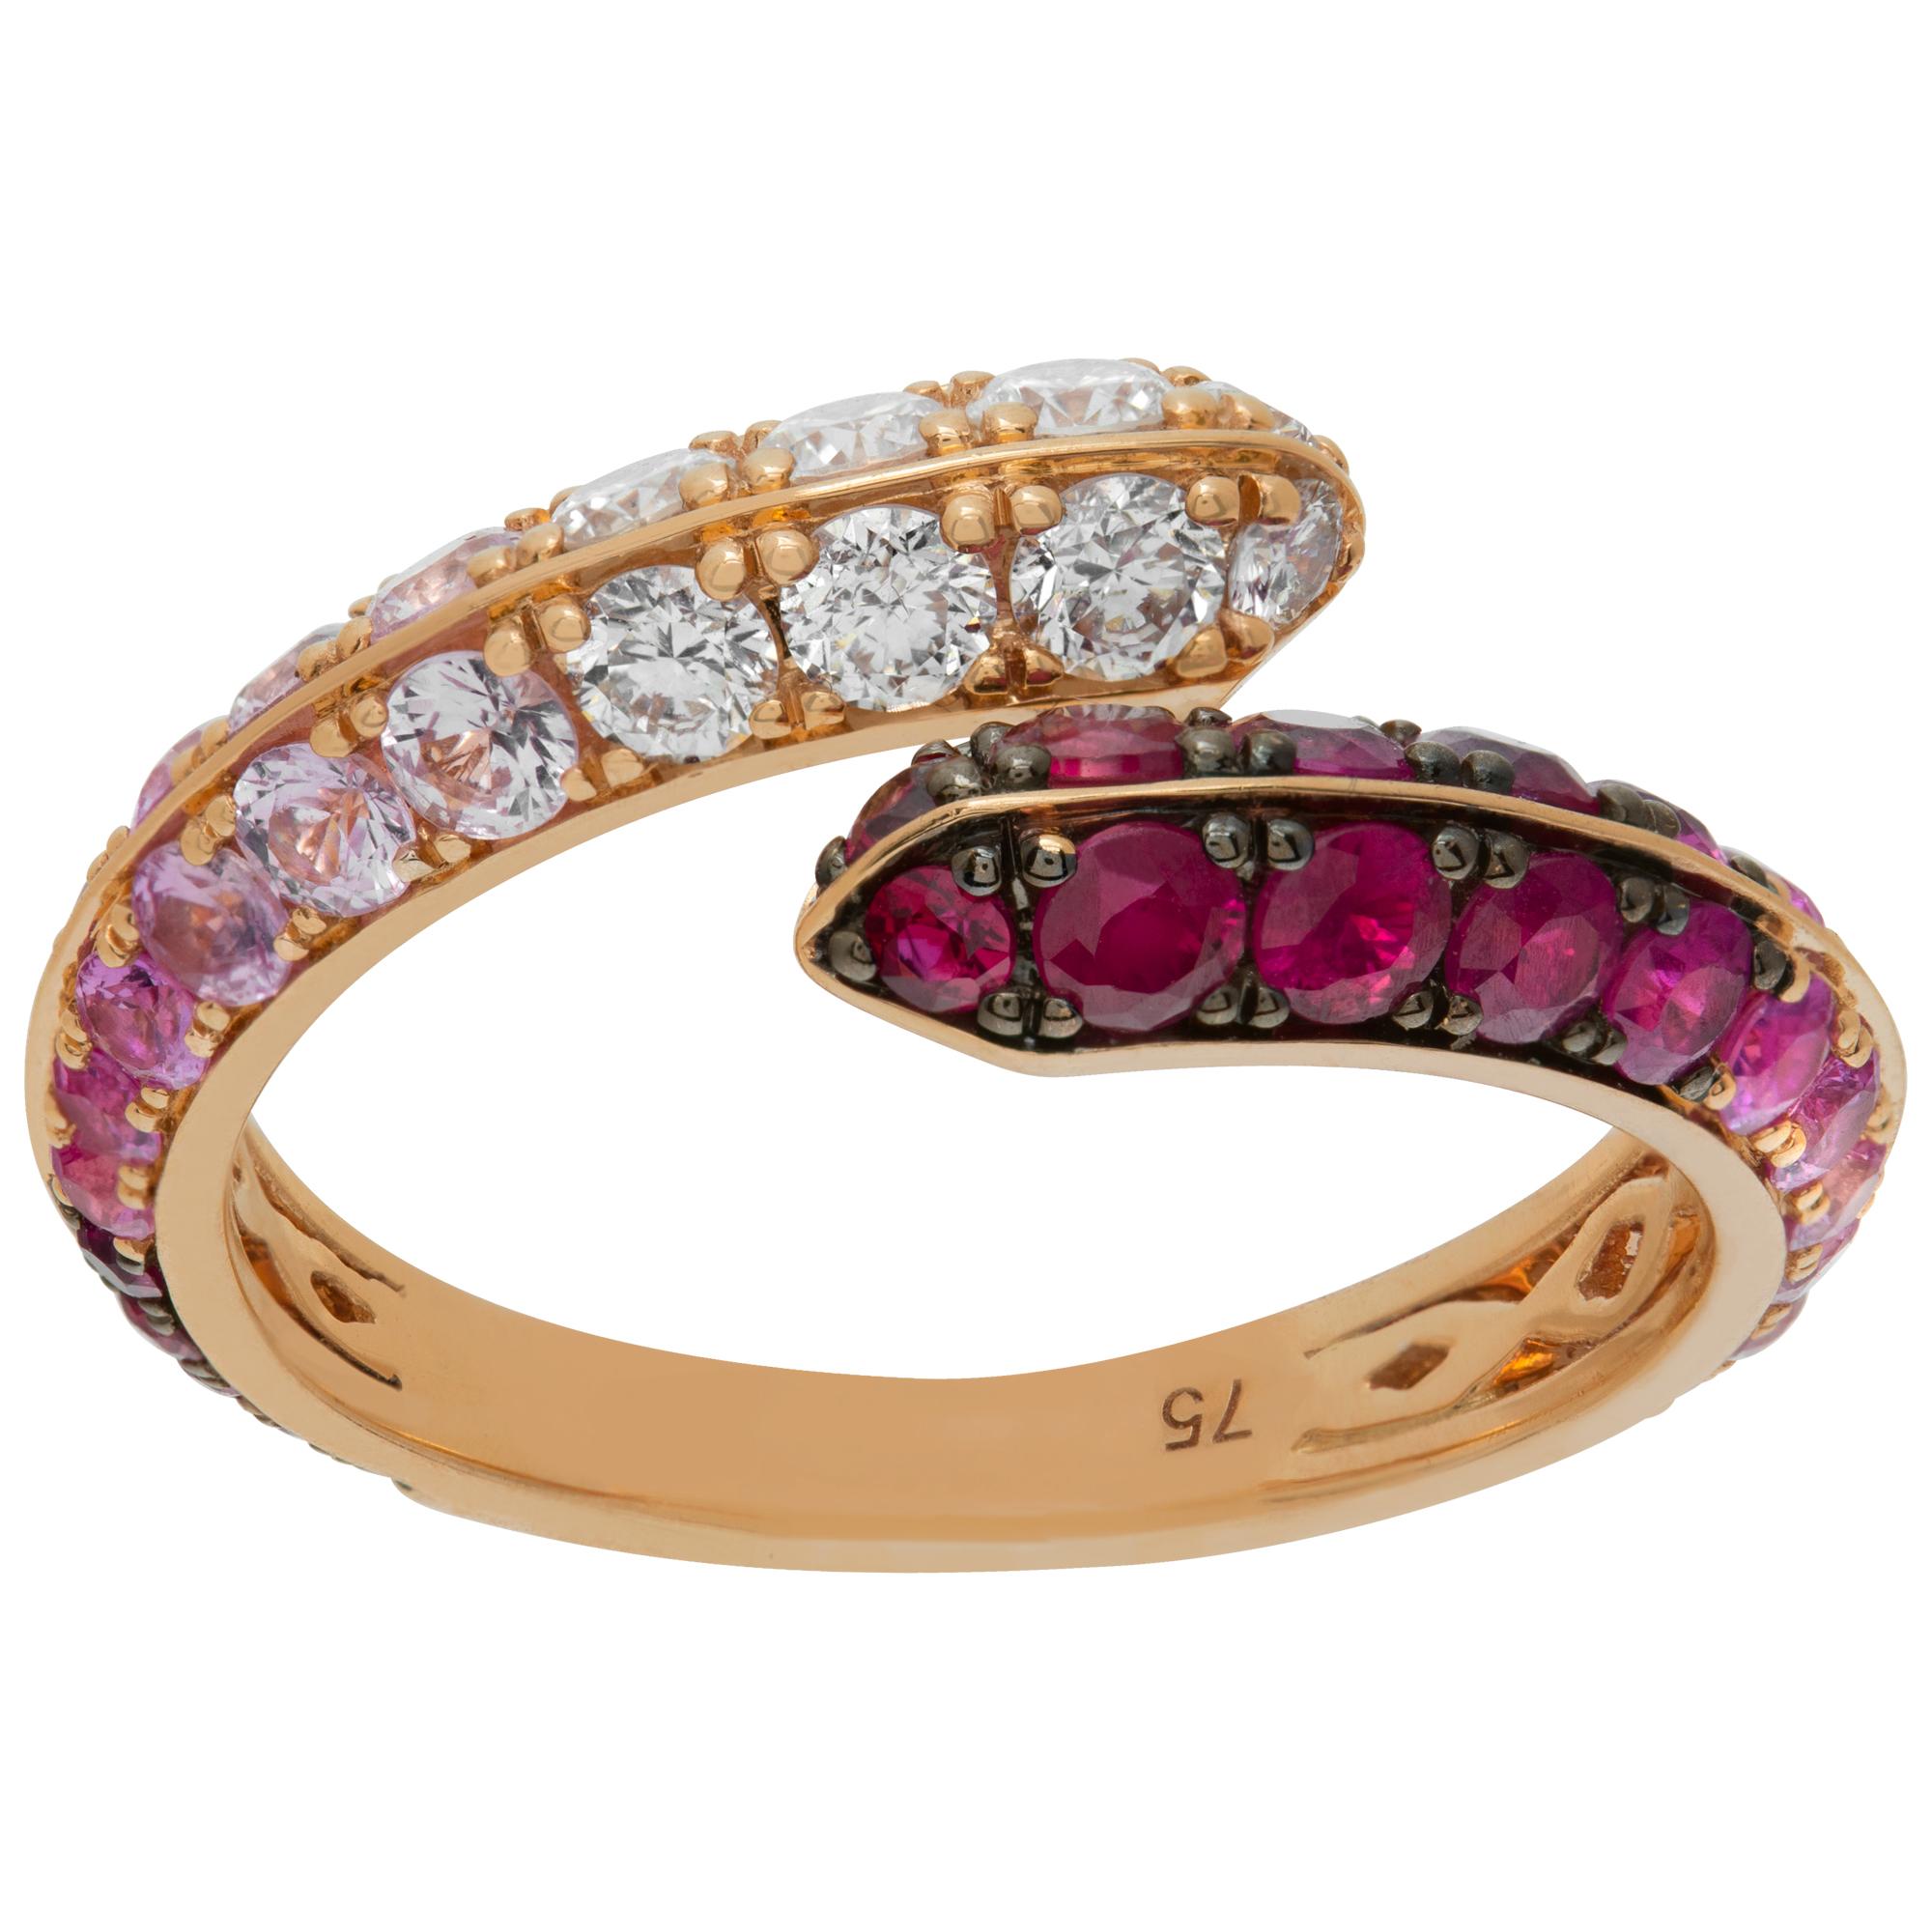 Diamond and pink sapphire crossover ring in 18k rose gold. Round brilliant cut diamonds approx. weight: 0.43 carat, estimate: G-H Color, VS Clarity. Round brilliant cut pink sapphire approx. weight: 1.50 carat. Size 6.5.This Diamond/Sapphires ring